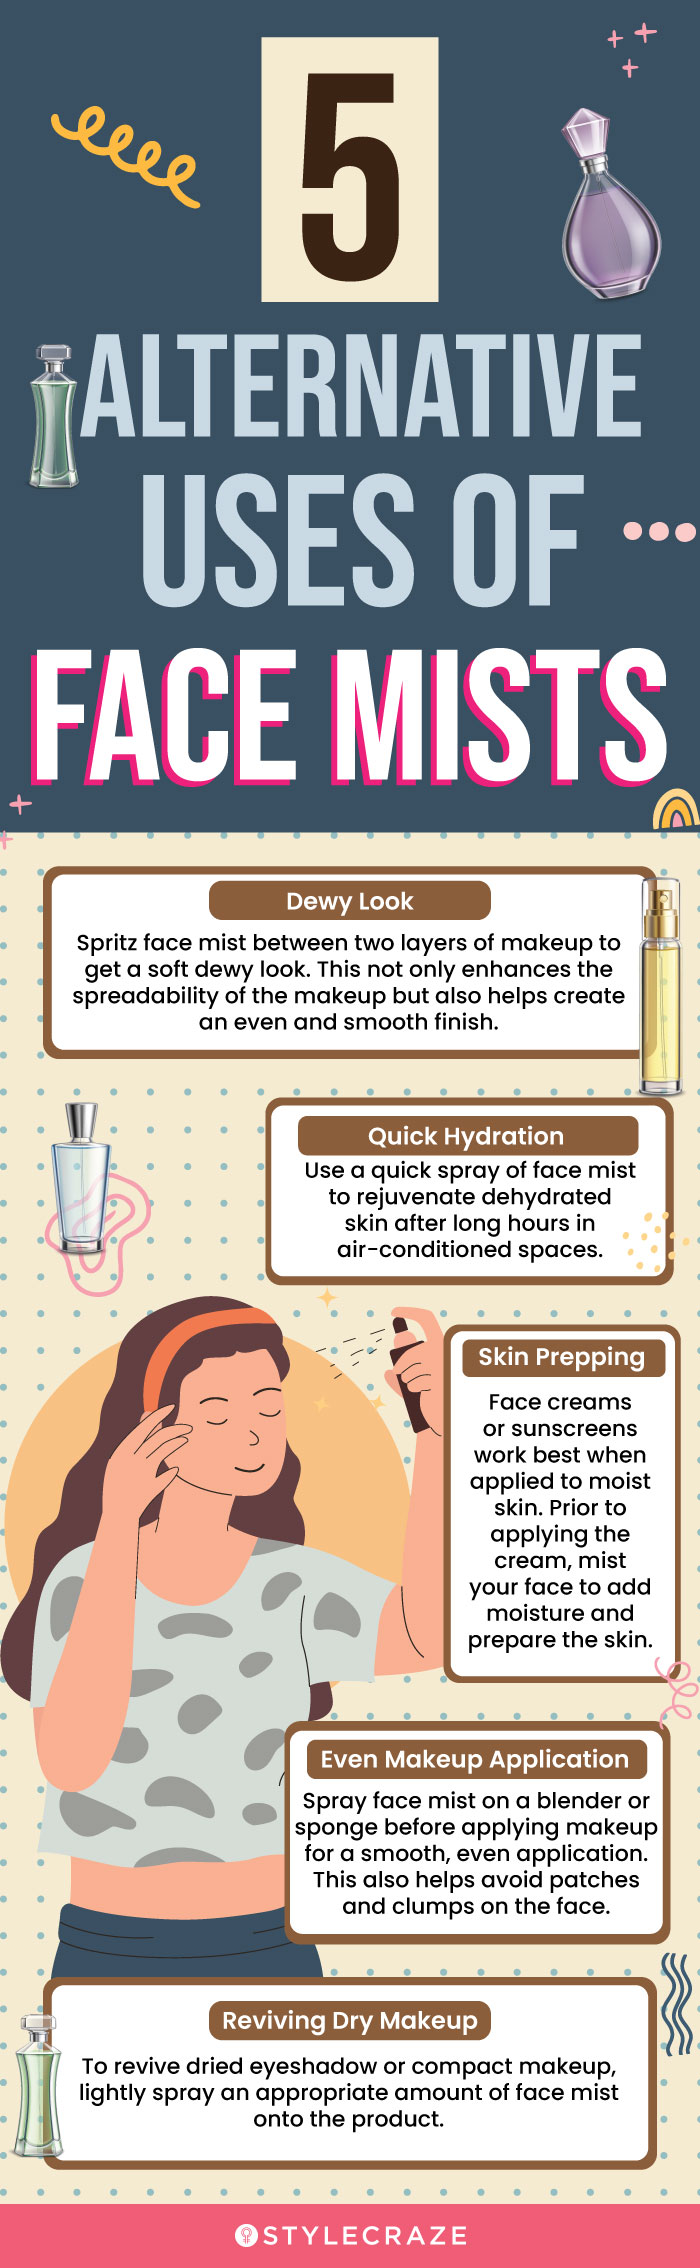 5 Alternative Uses Of Face Mists (infographic)